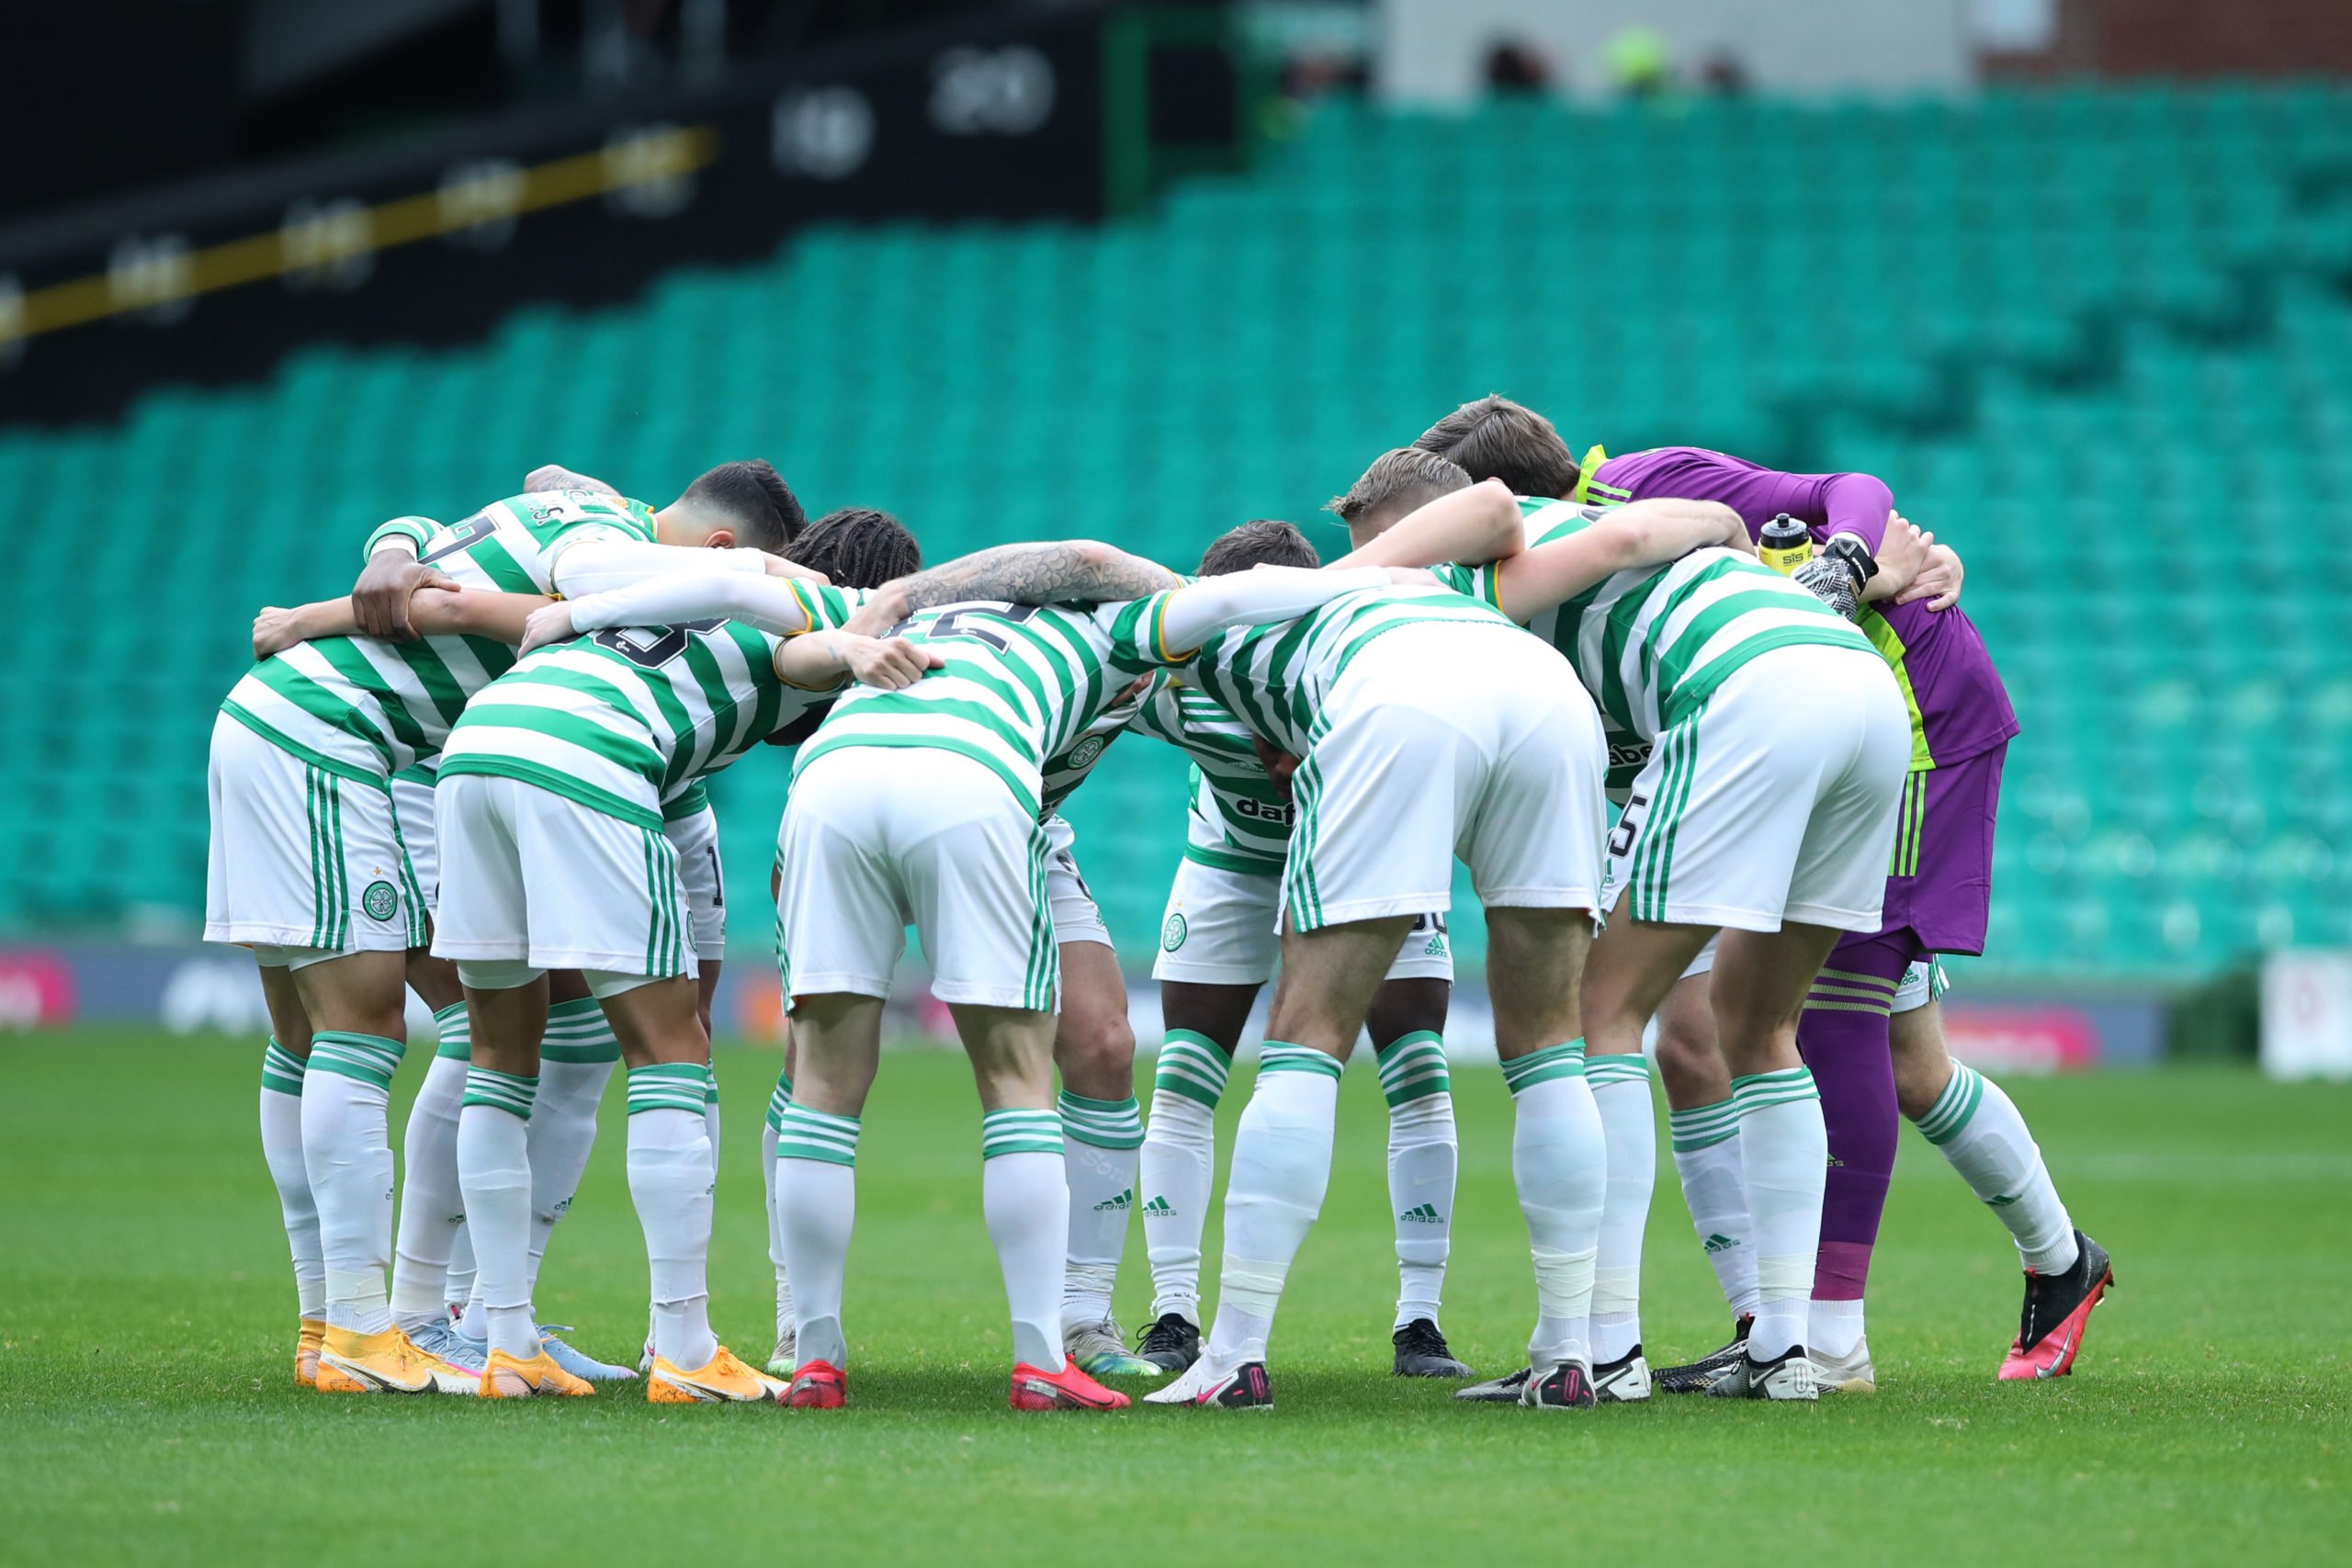 Celtic before the match against Rangers